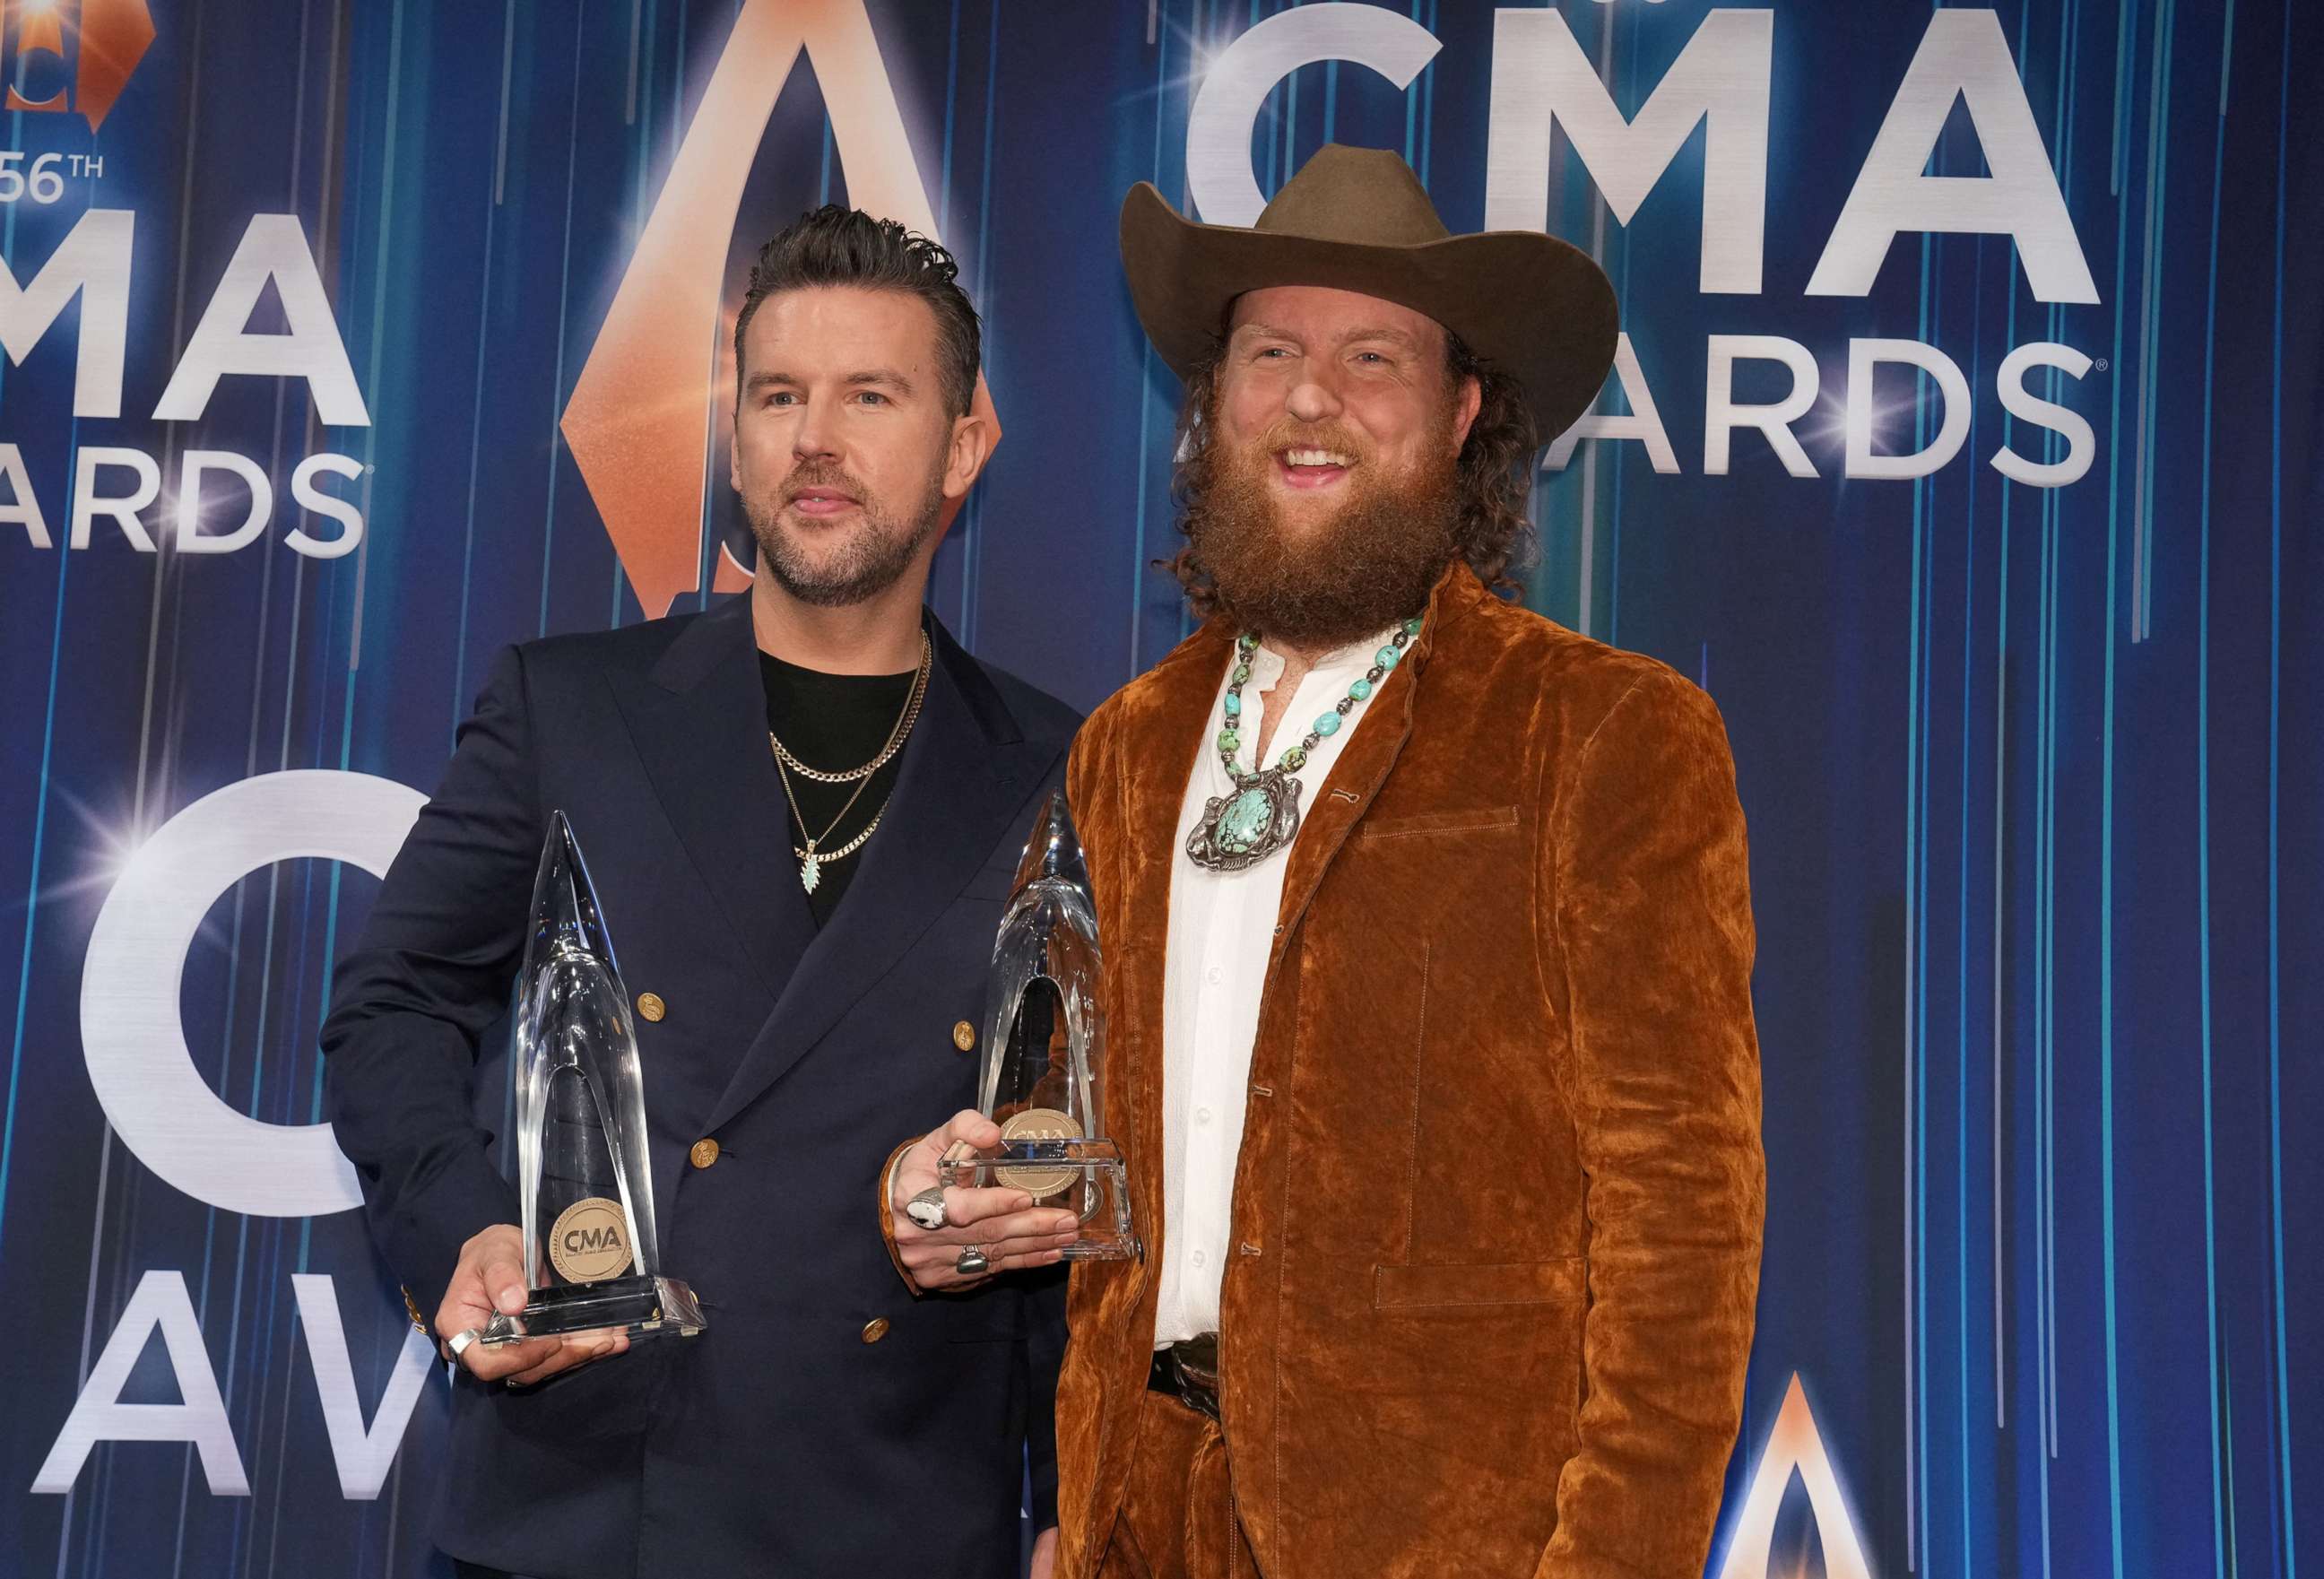 PHOTO: Brothers Osborne pose with their award for Vocal Duo of the Year at the 56th Annual CMA Awards at Bridgestone Arena, in Nashville, Tenn., Nov. 9, 2022.